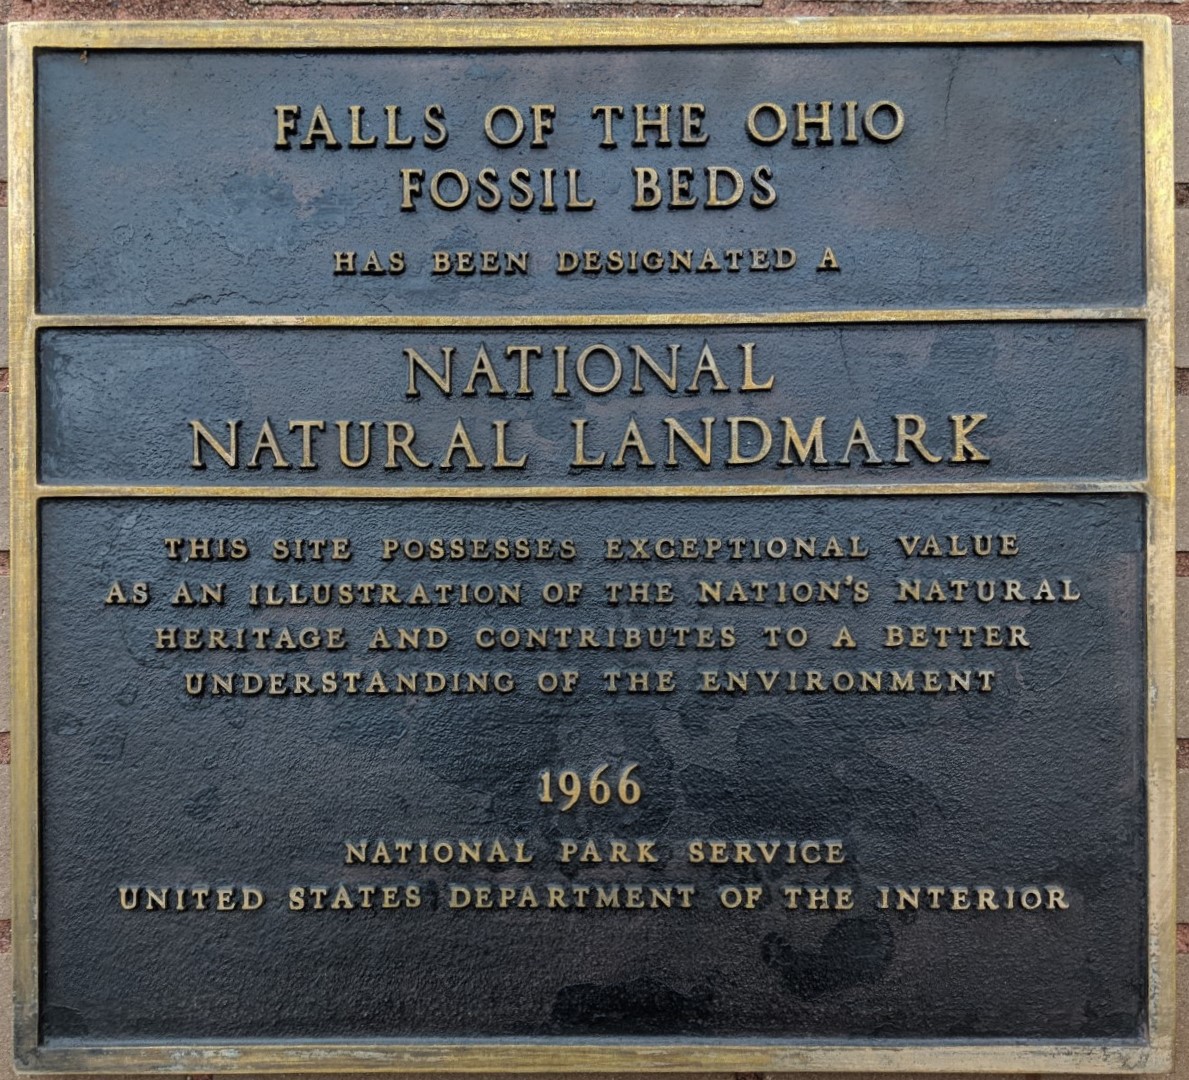 Falls of the Ohio fossil beds: a National Natural Landmark